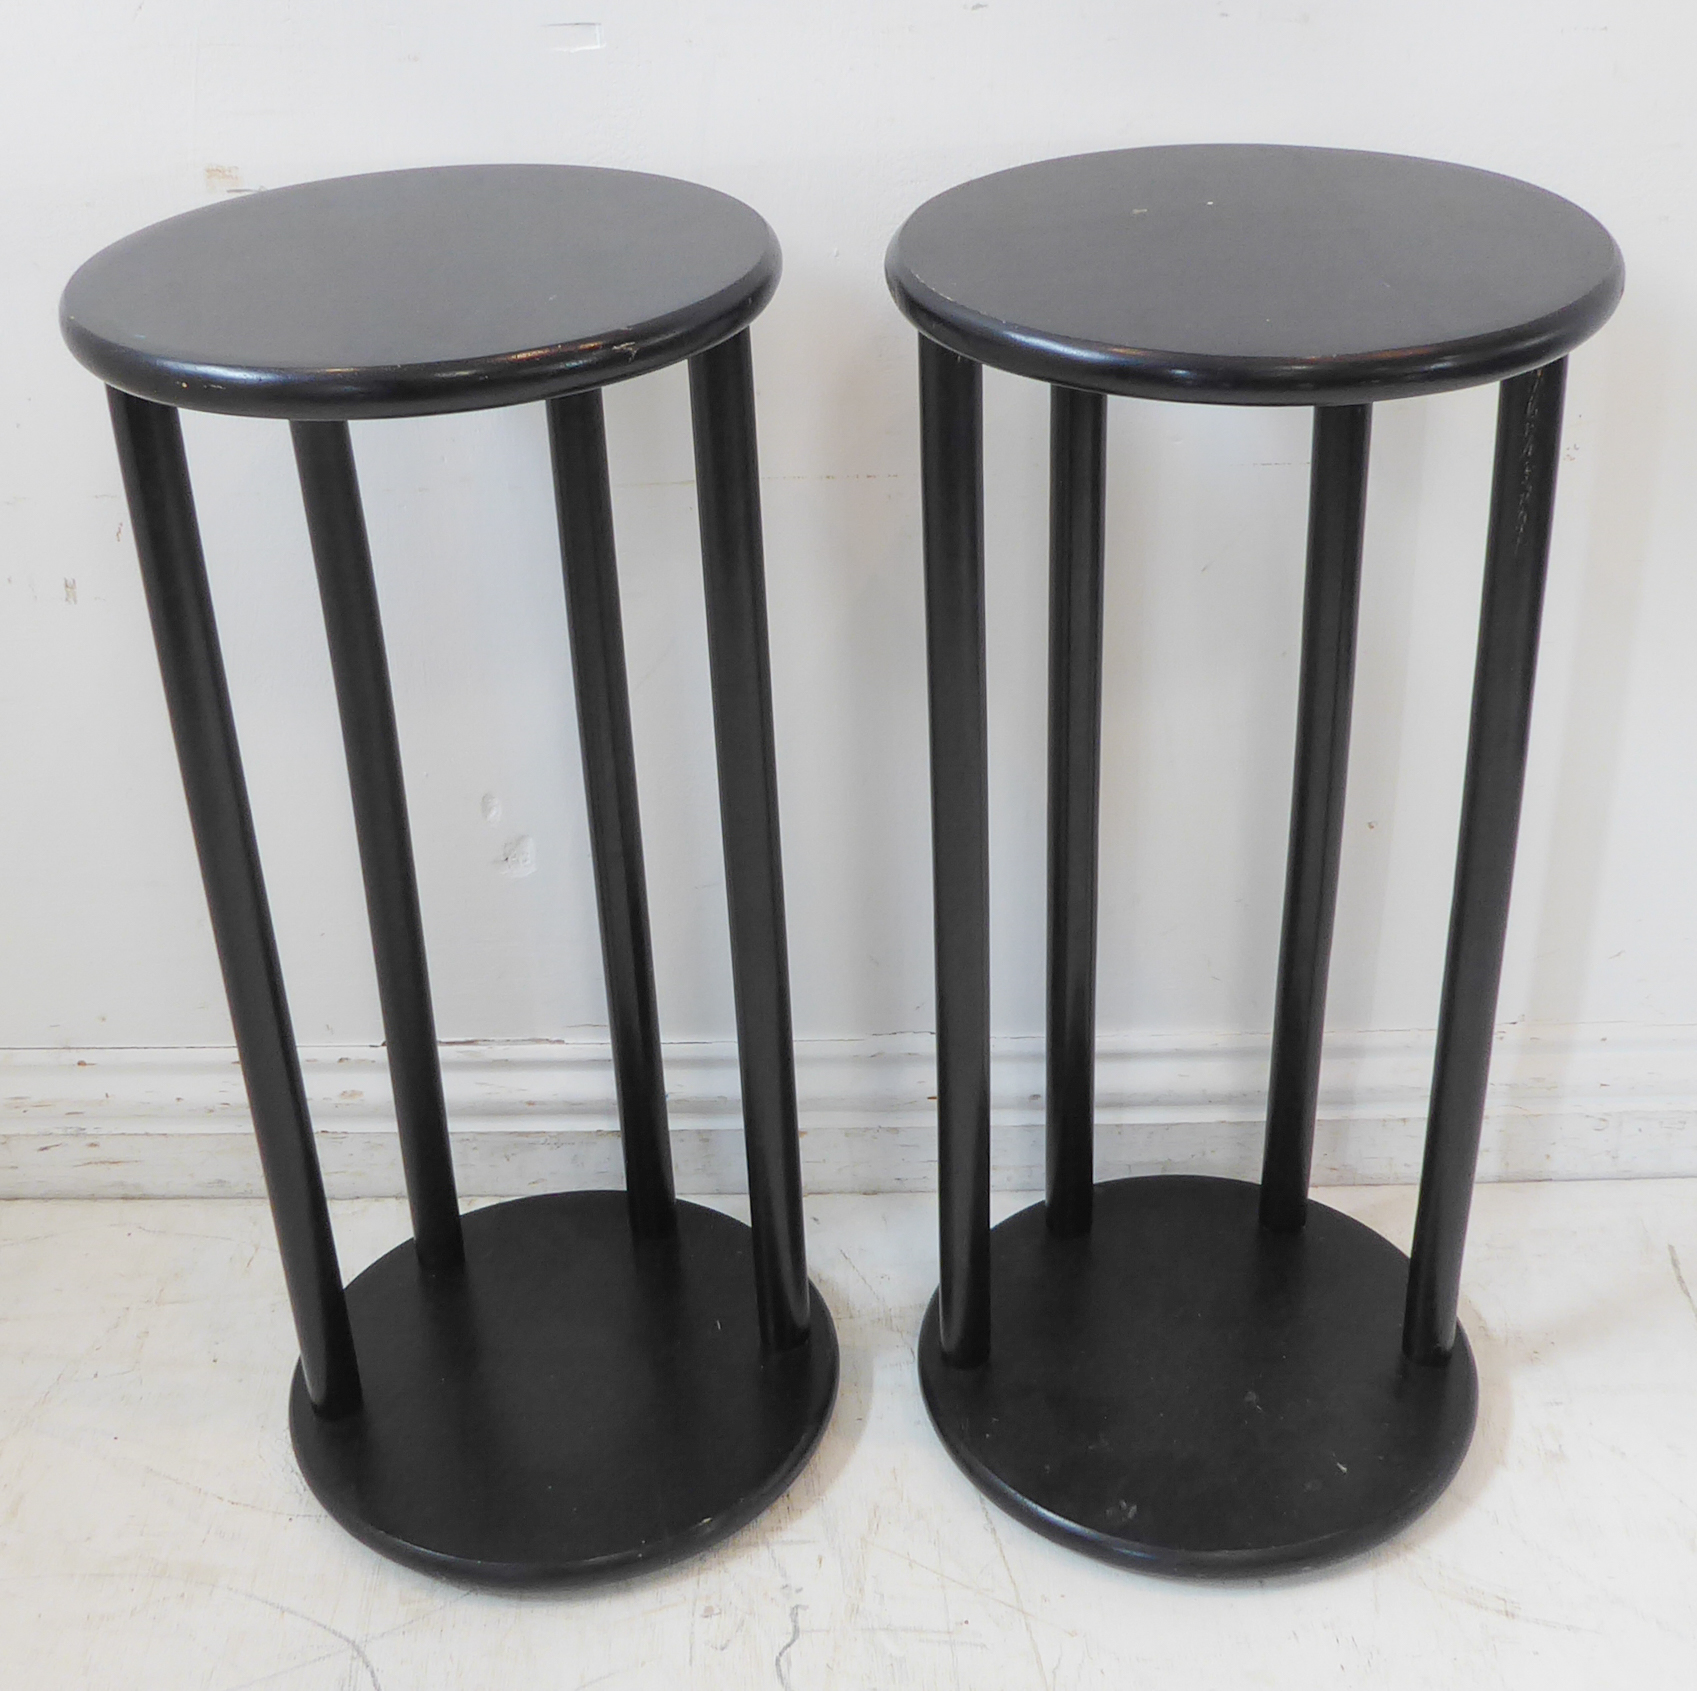 A pair of circular ebonised wooden stands (30cm diameter x 65cm high) - Image 3 of 3